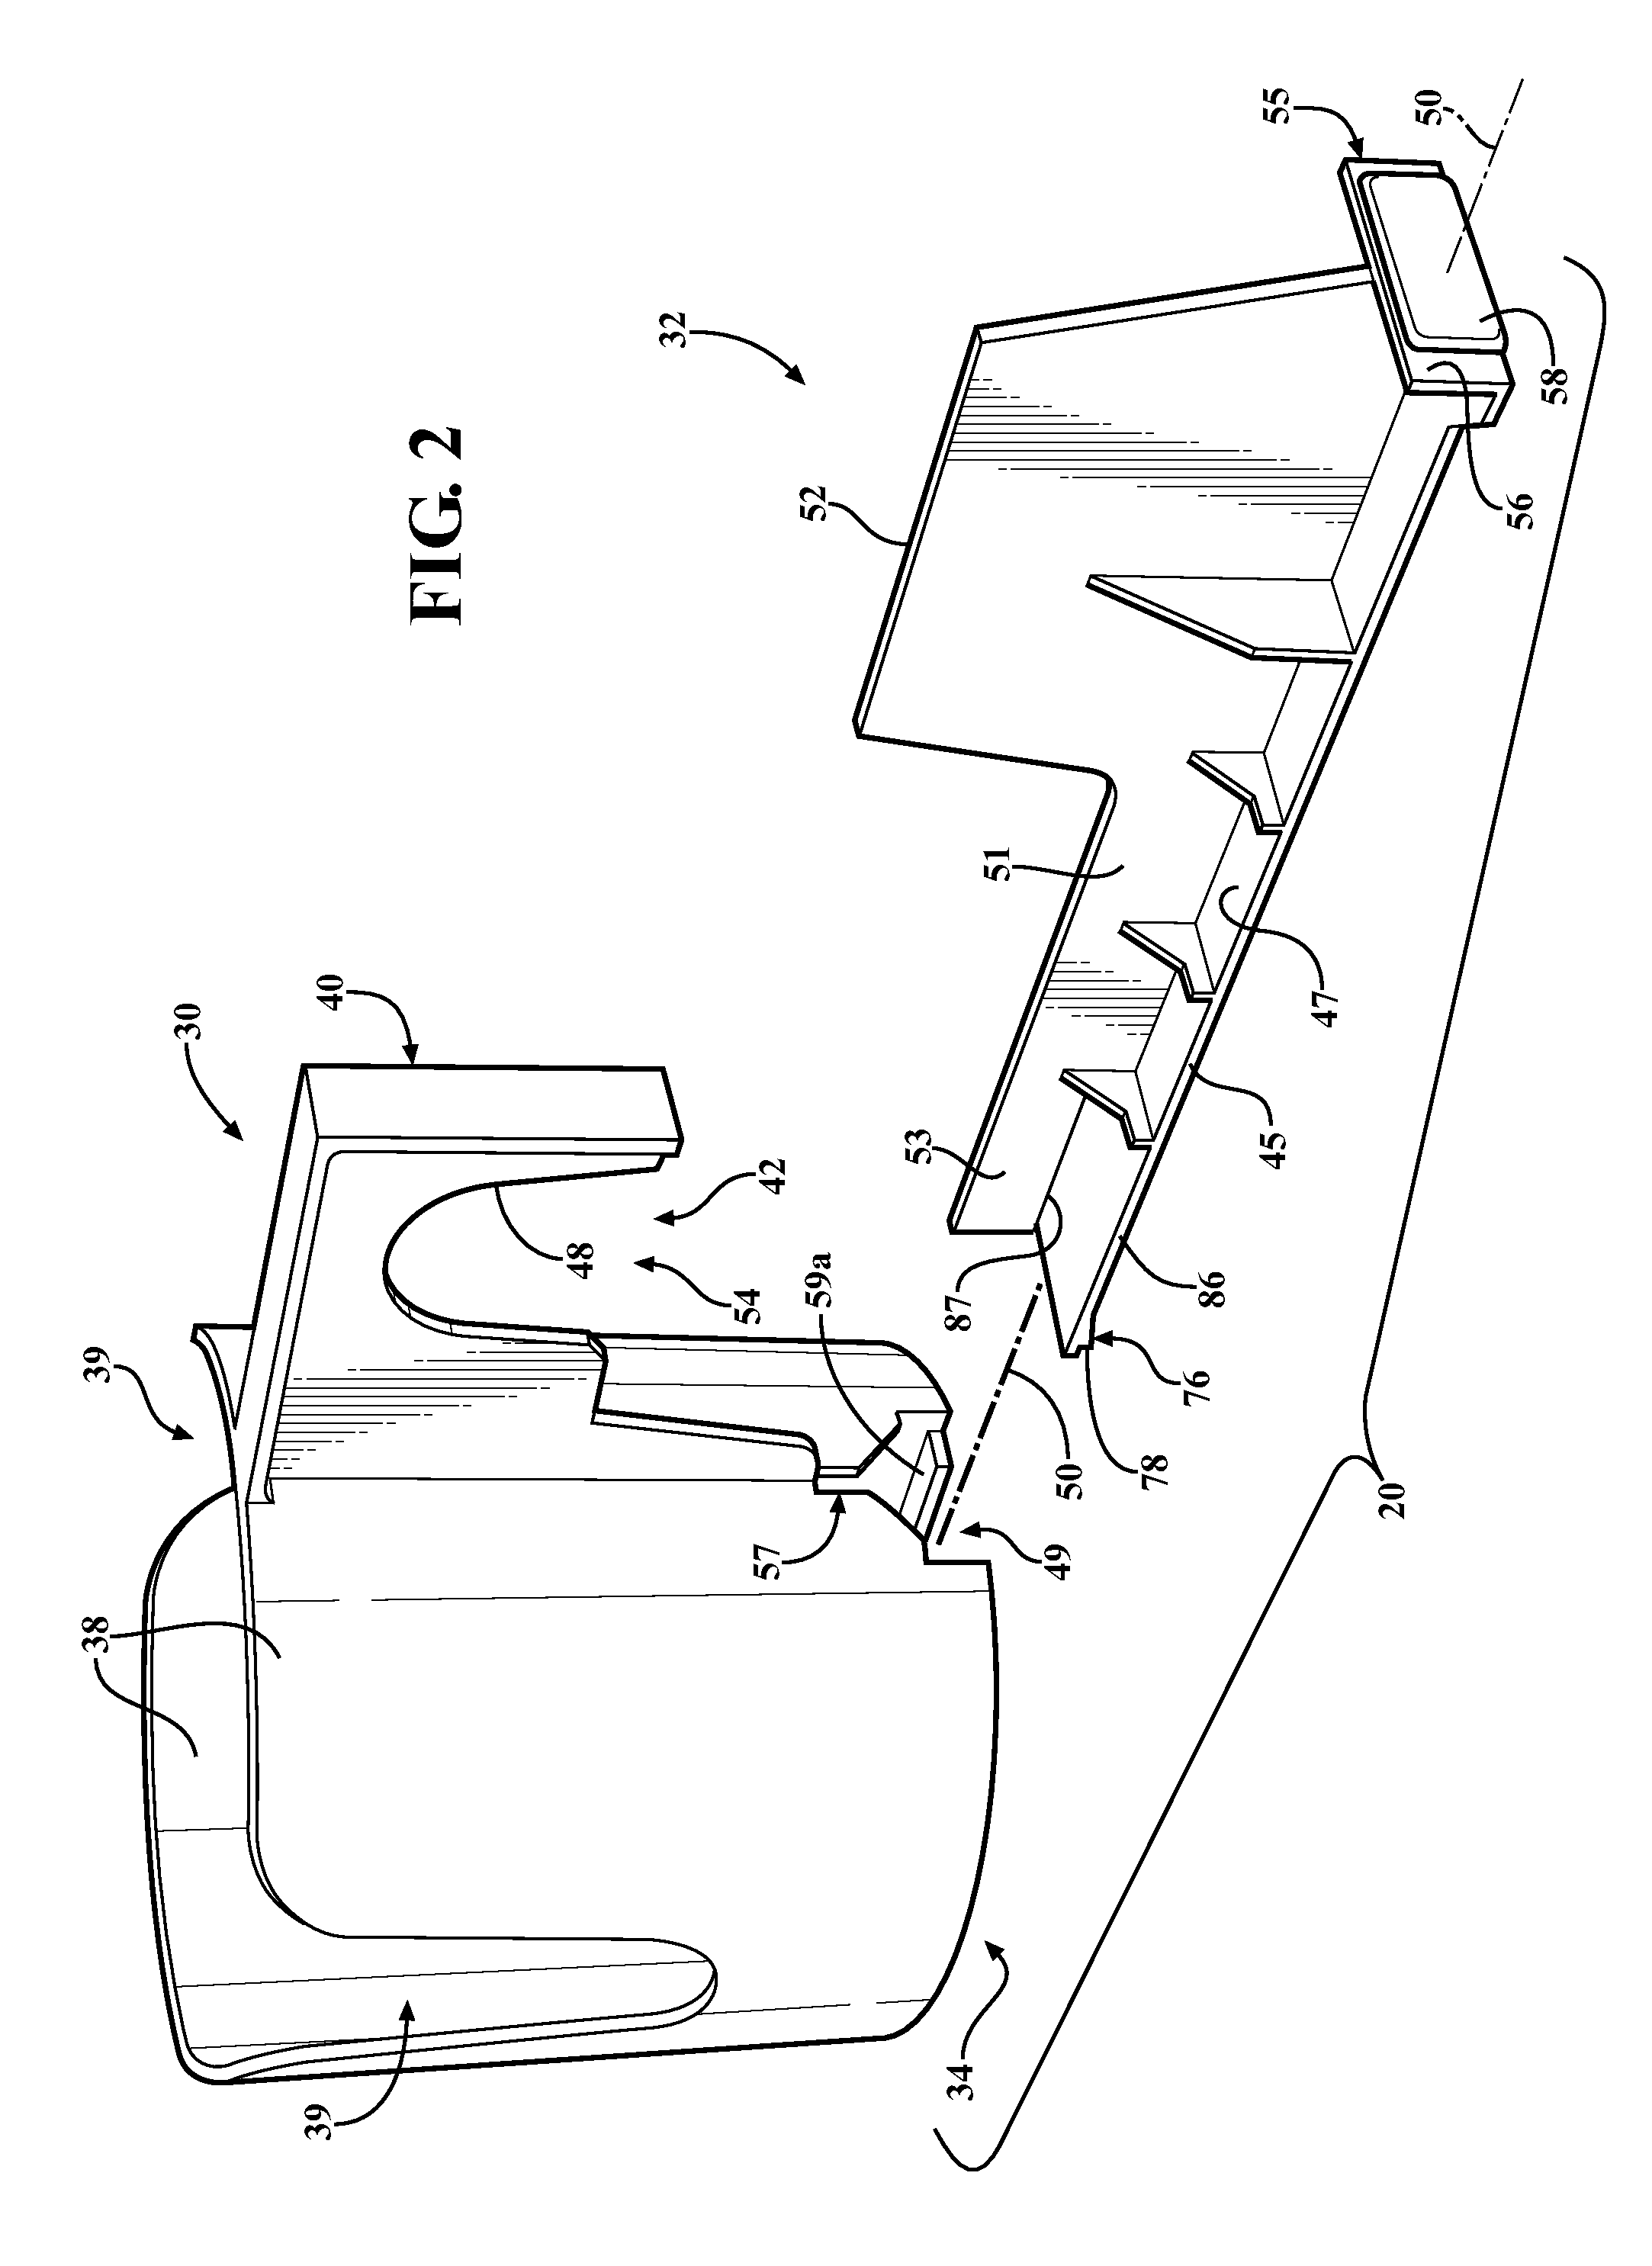 Beverage container receptacle and method of installing the same